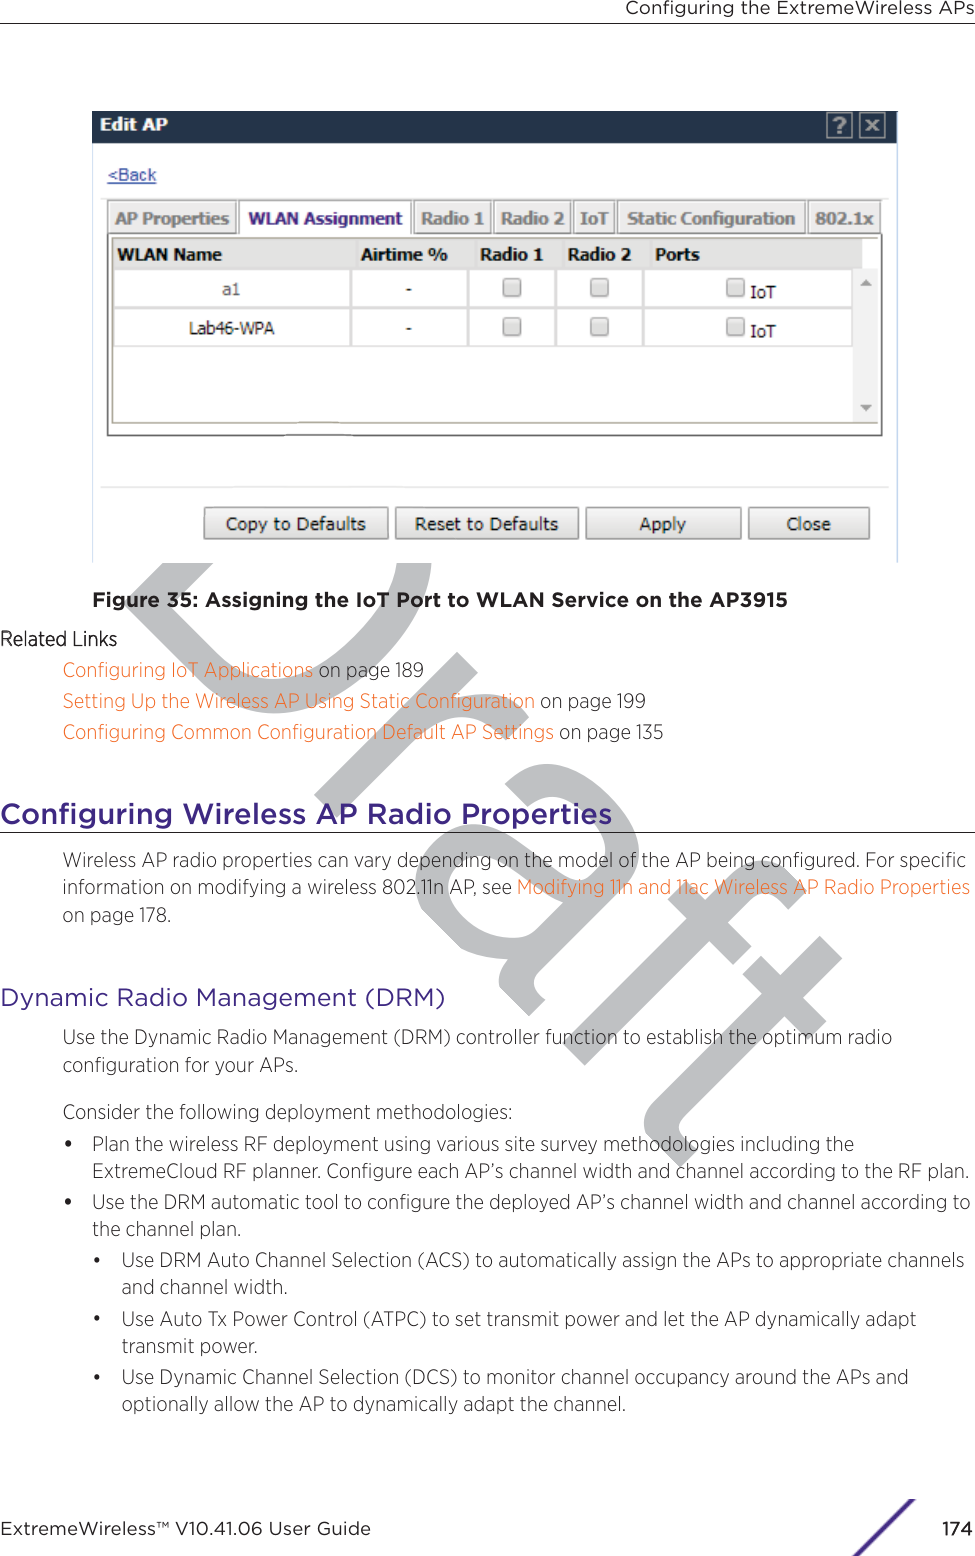 DraftFigure 35: Assigning the IoT Port to WLAN Service on the AP3915RRelated LinksConﬁguring IoT Applications on page 189Setting Up the Wireless AP Using Static Conﬁguration on page 199Conﬁguring Common Conﬁguration Default AP Settings on page 135Conﬁguring Wireless AP Radio PropertiesWireless AP radio properties can vary depending on the model of the AP being conﬁgured. For speciﬁcinformation on modifying a wireless 802.11n AP, see Modifying 11n and 11ac Wireless AP Radio Propertieson page 178.Dynamic Radio Management (DRM)Use the Dynamic Radio Management (DRM) controller function to establish the optimum radioconﬁguration for your APs.Consider the following deployment methodologies:•Plan the wireless RF deployment using various site survey methodologies including theExtremeCloud RF planner. Conﬁgure each AP’s channel width and channel according to the RF plan.•Use the DRM automatic tool to conﬁgure the deployed AP’s channel width and channel according tothe channel plan.•Use DRM Auto Channel Selection (ACS) to automatically assign the APs to appropriate channelsand channel width.•Use Auto Tx Power Control (ATPC) to set transmit power and let the AP dynamically adapttransmit power.•Use Dynamic Channel Selection (DCS) to monitor channel occupancy around the APs andoptionally allow the AP to dynamically adapt the channel.Conﬁguring the ExtremeWireless APsExtremeWireless™ V10.41.06 User Guide174